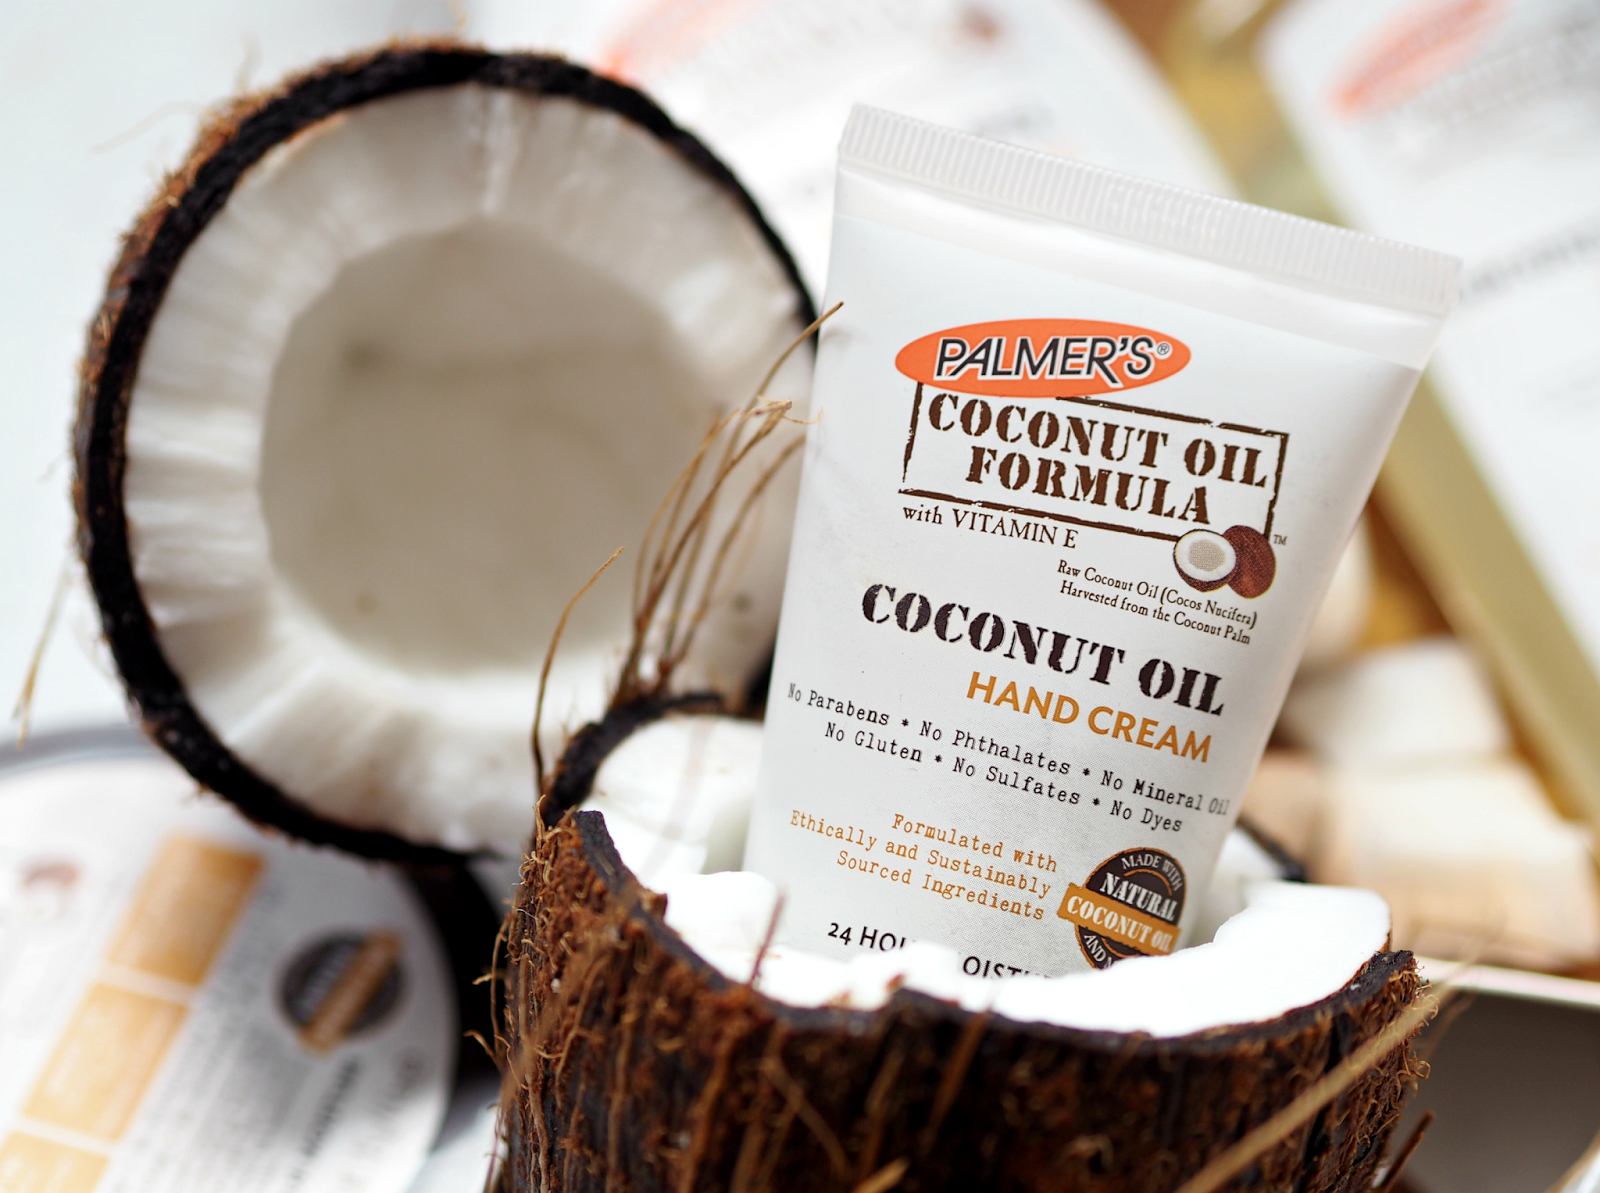 Why Is Coconut Oil Such A Hero" Back To Basics With Mother Nature's Much Loved Ingredient #CoconutEscape